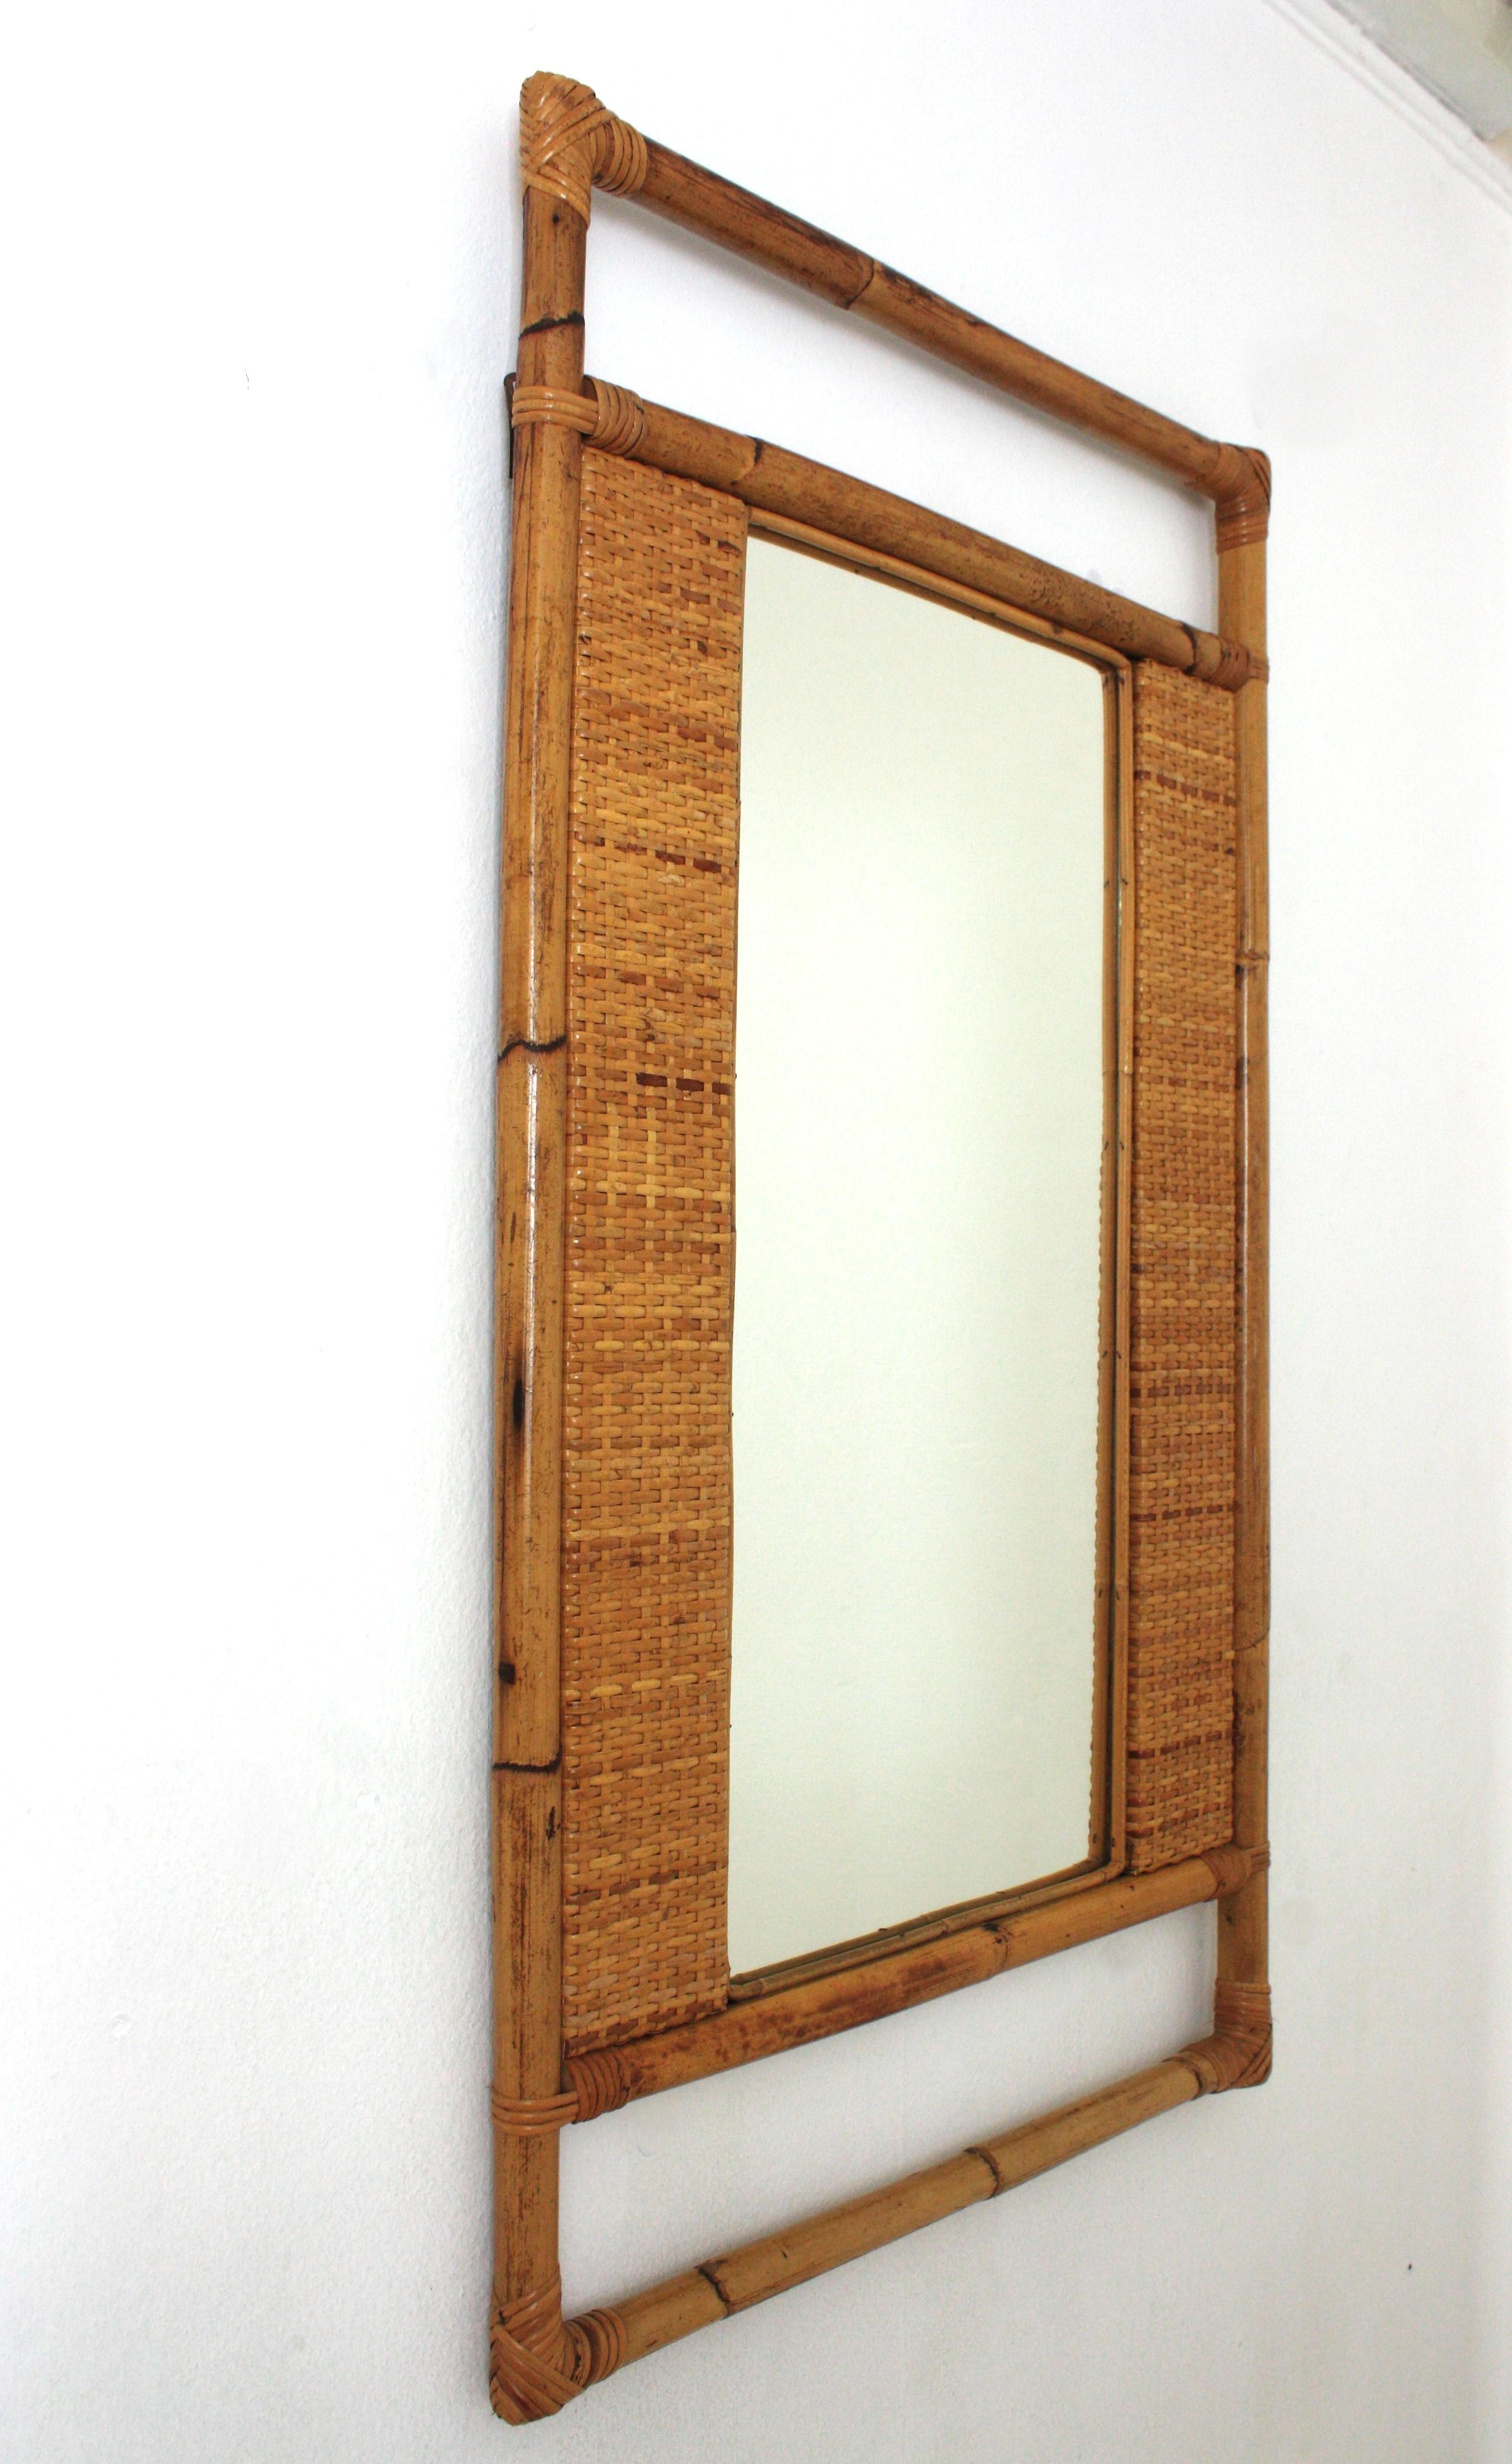 Hand-Crafted Spanish Rectangular Rattan Wall Mirror with Geometric Woven Frame For Sale